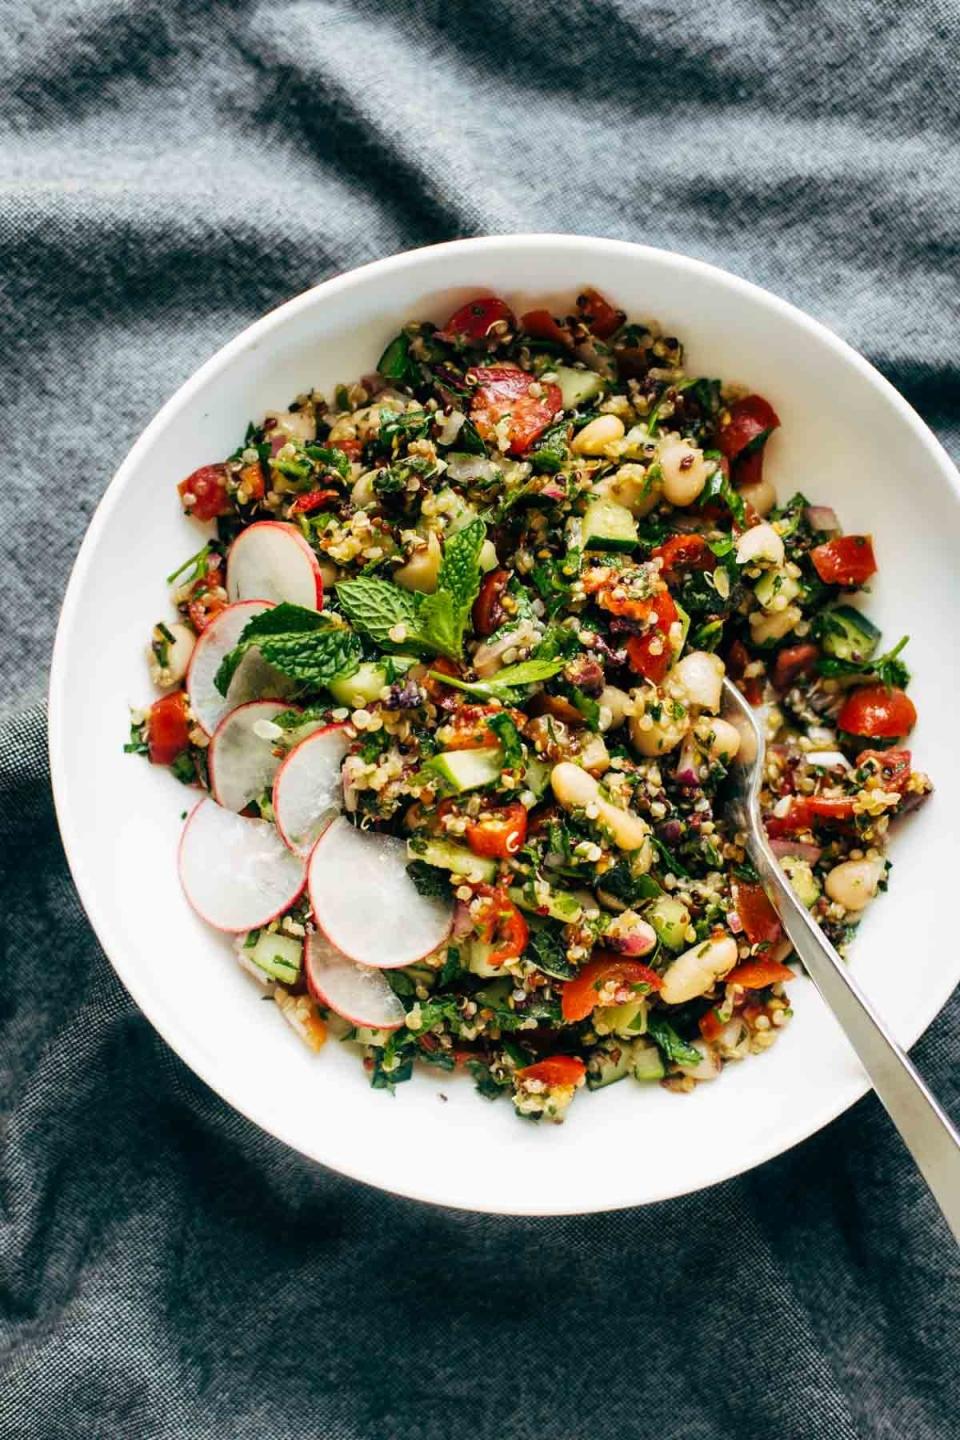 Packed with succulent white beans and tangy flavors from a lime spritz and strong kalamata olives, this salad is full of freshness.Recipe: Chopped Greek Quinoa Salad